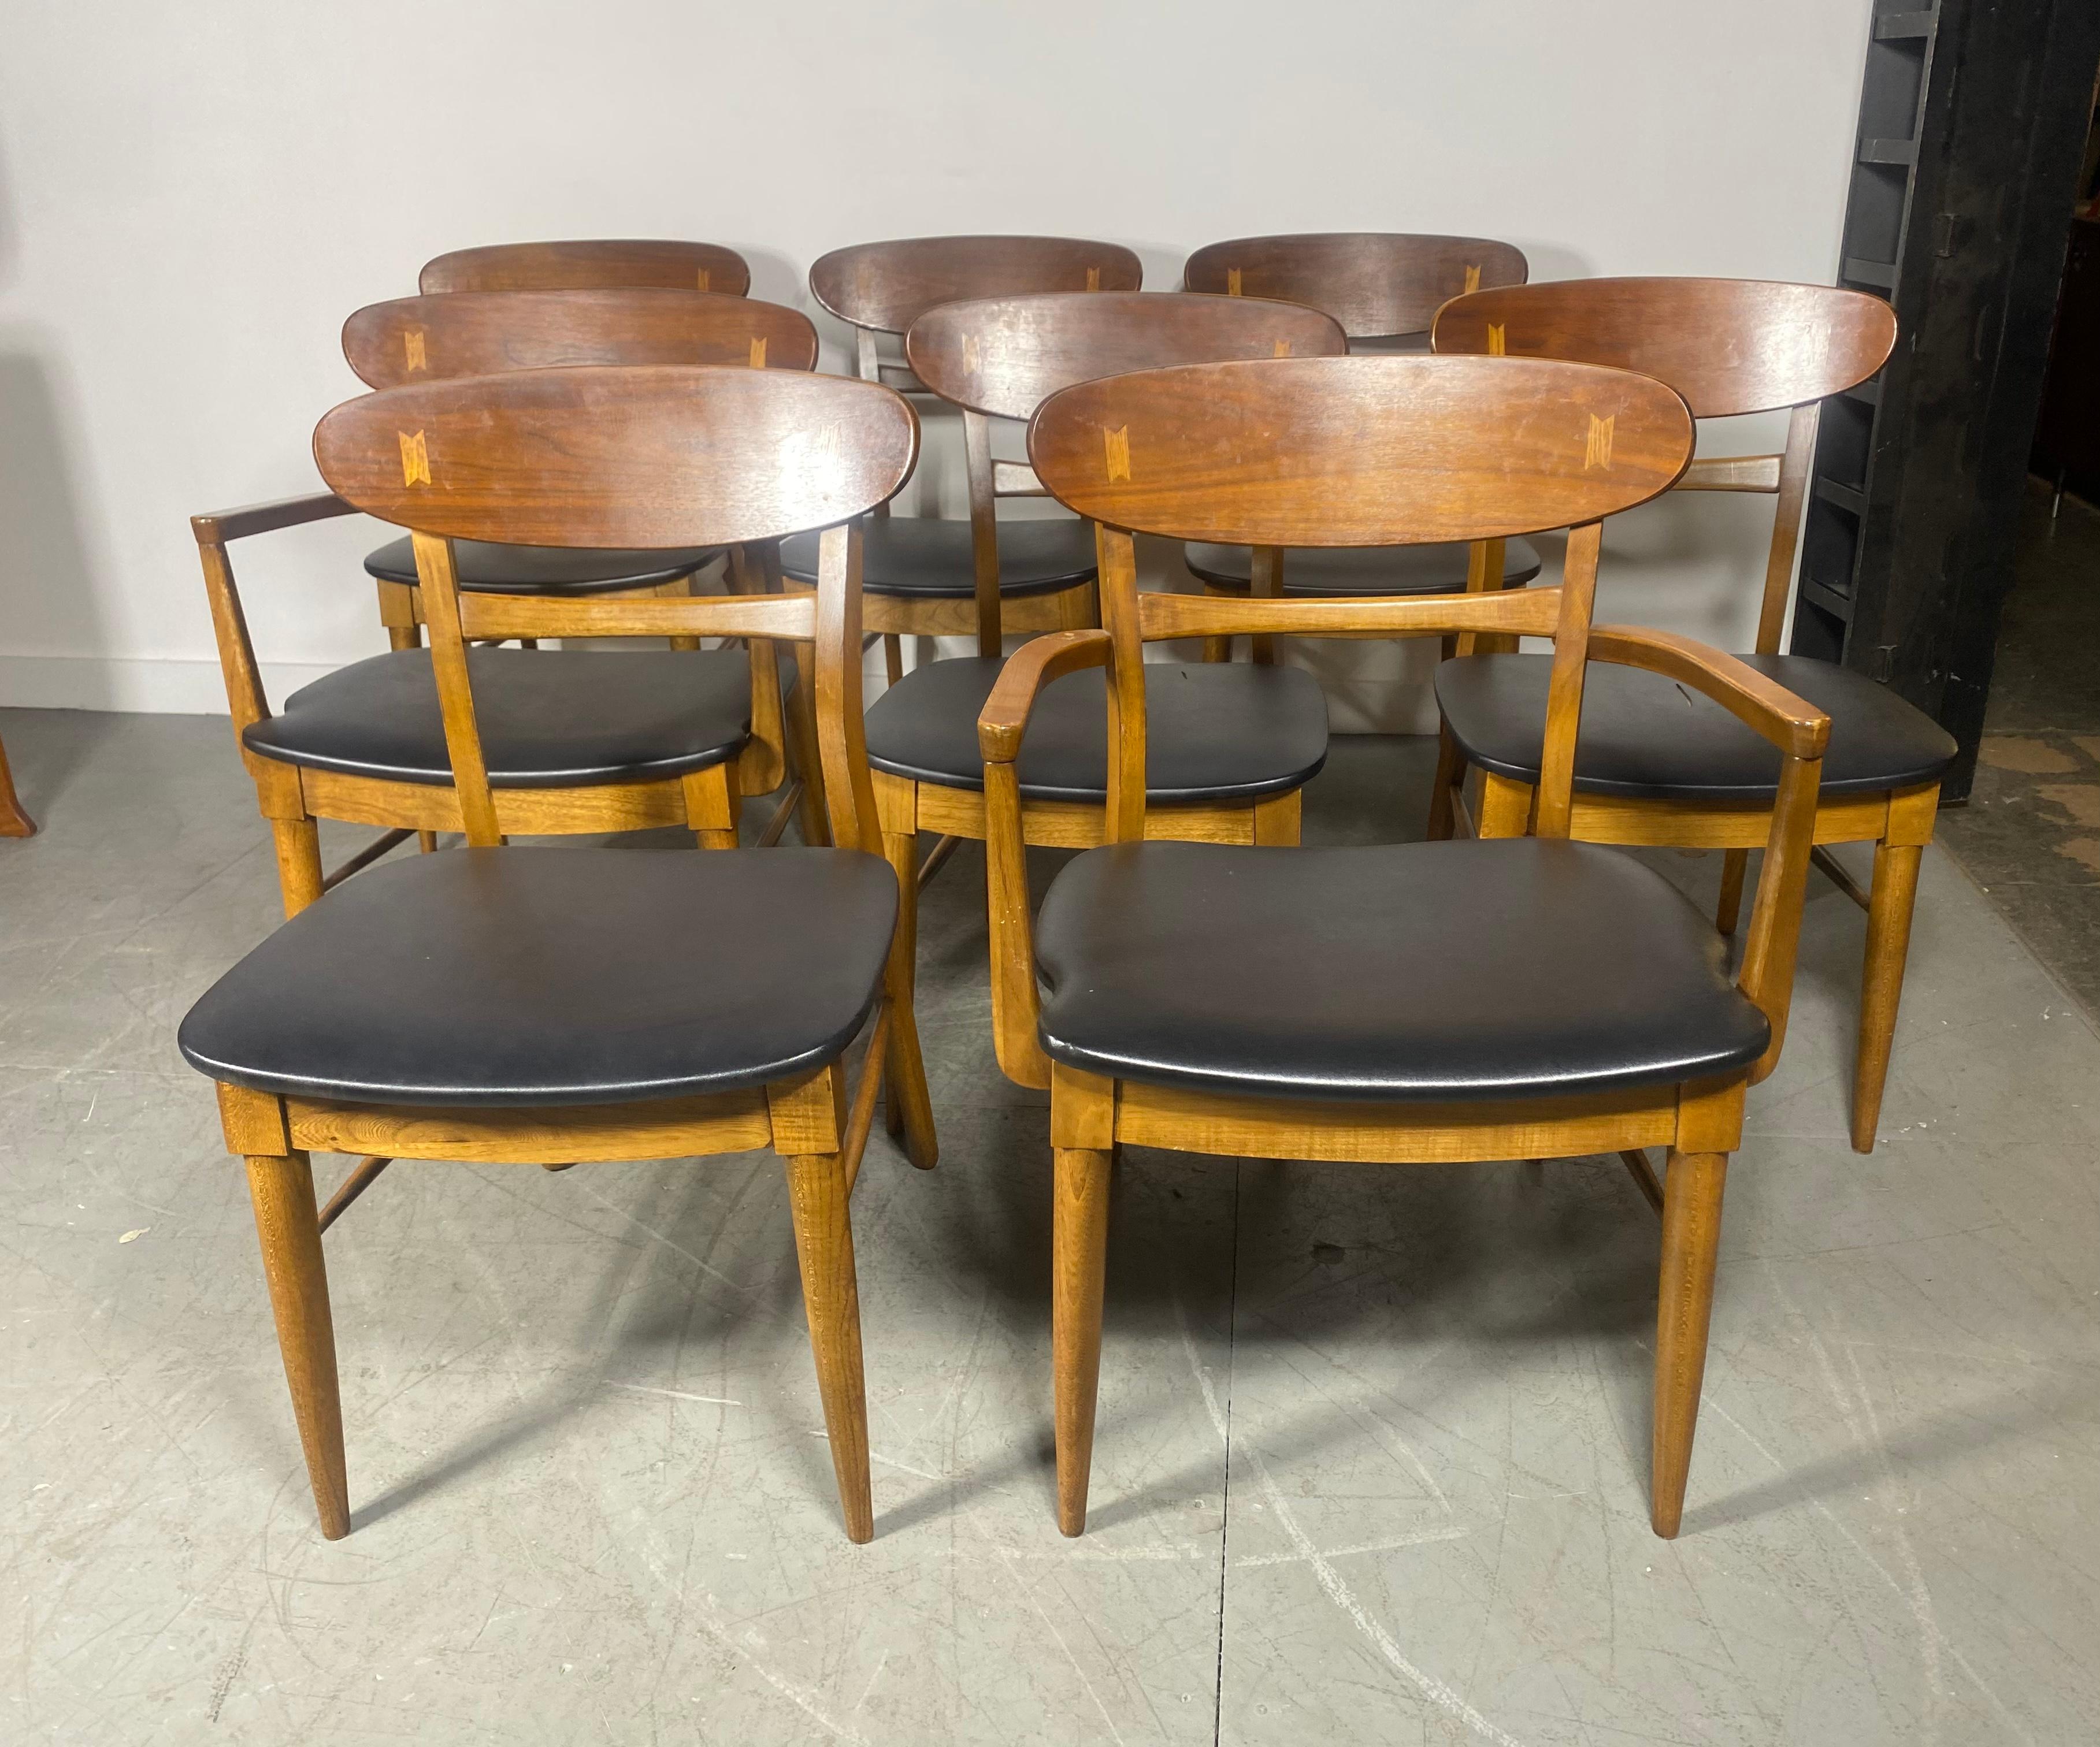 Mid-20th Century Midcentury Sculpted Back Dining Chairs Andre Bus for Lane Acclaim Set of 8 For Sale